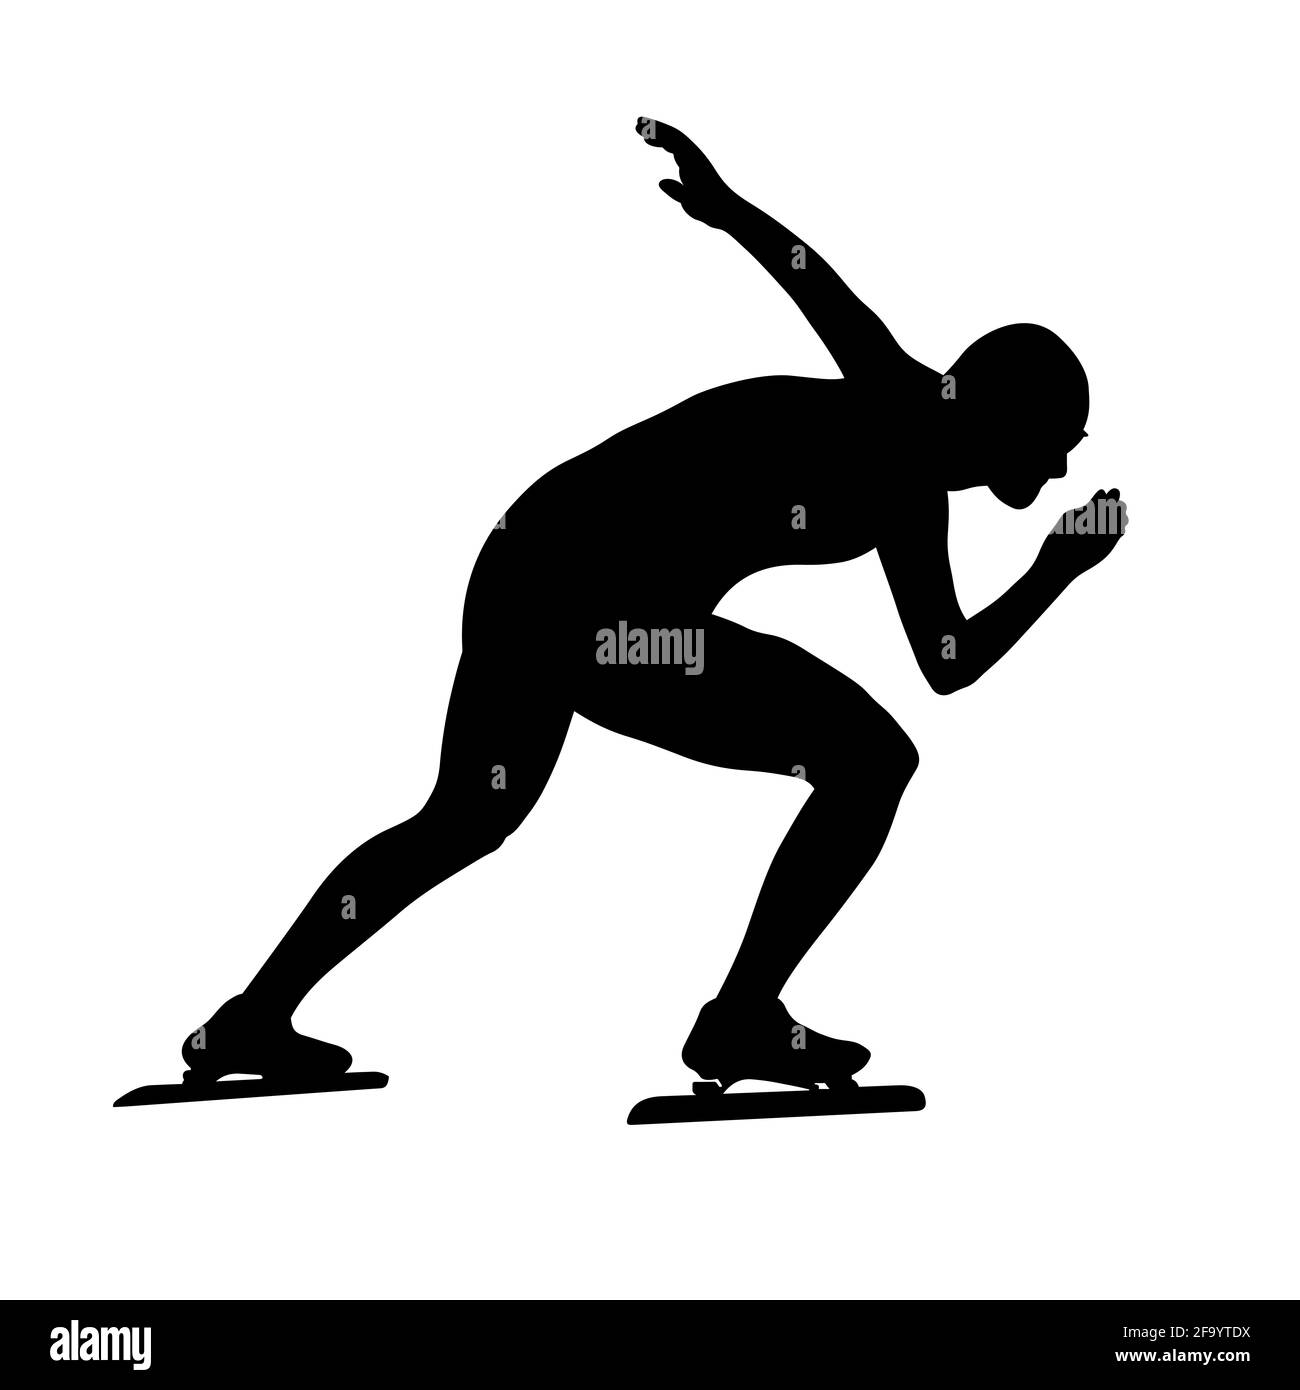 male speed skater athlete black silhouette in sports race Stock Photo